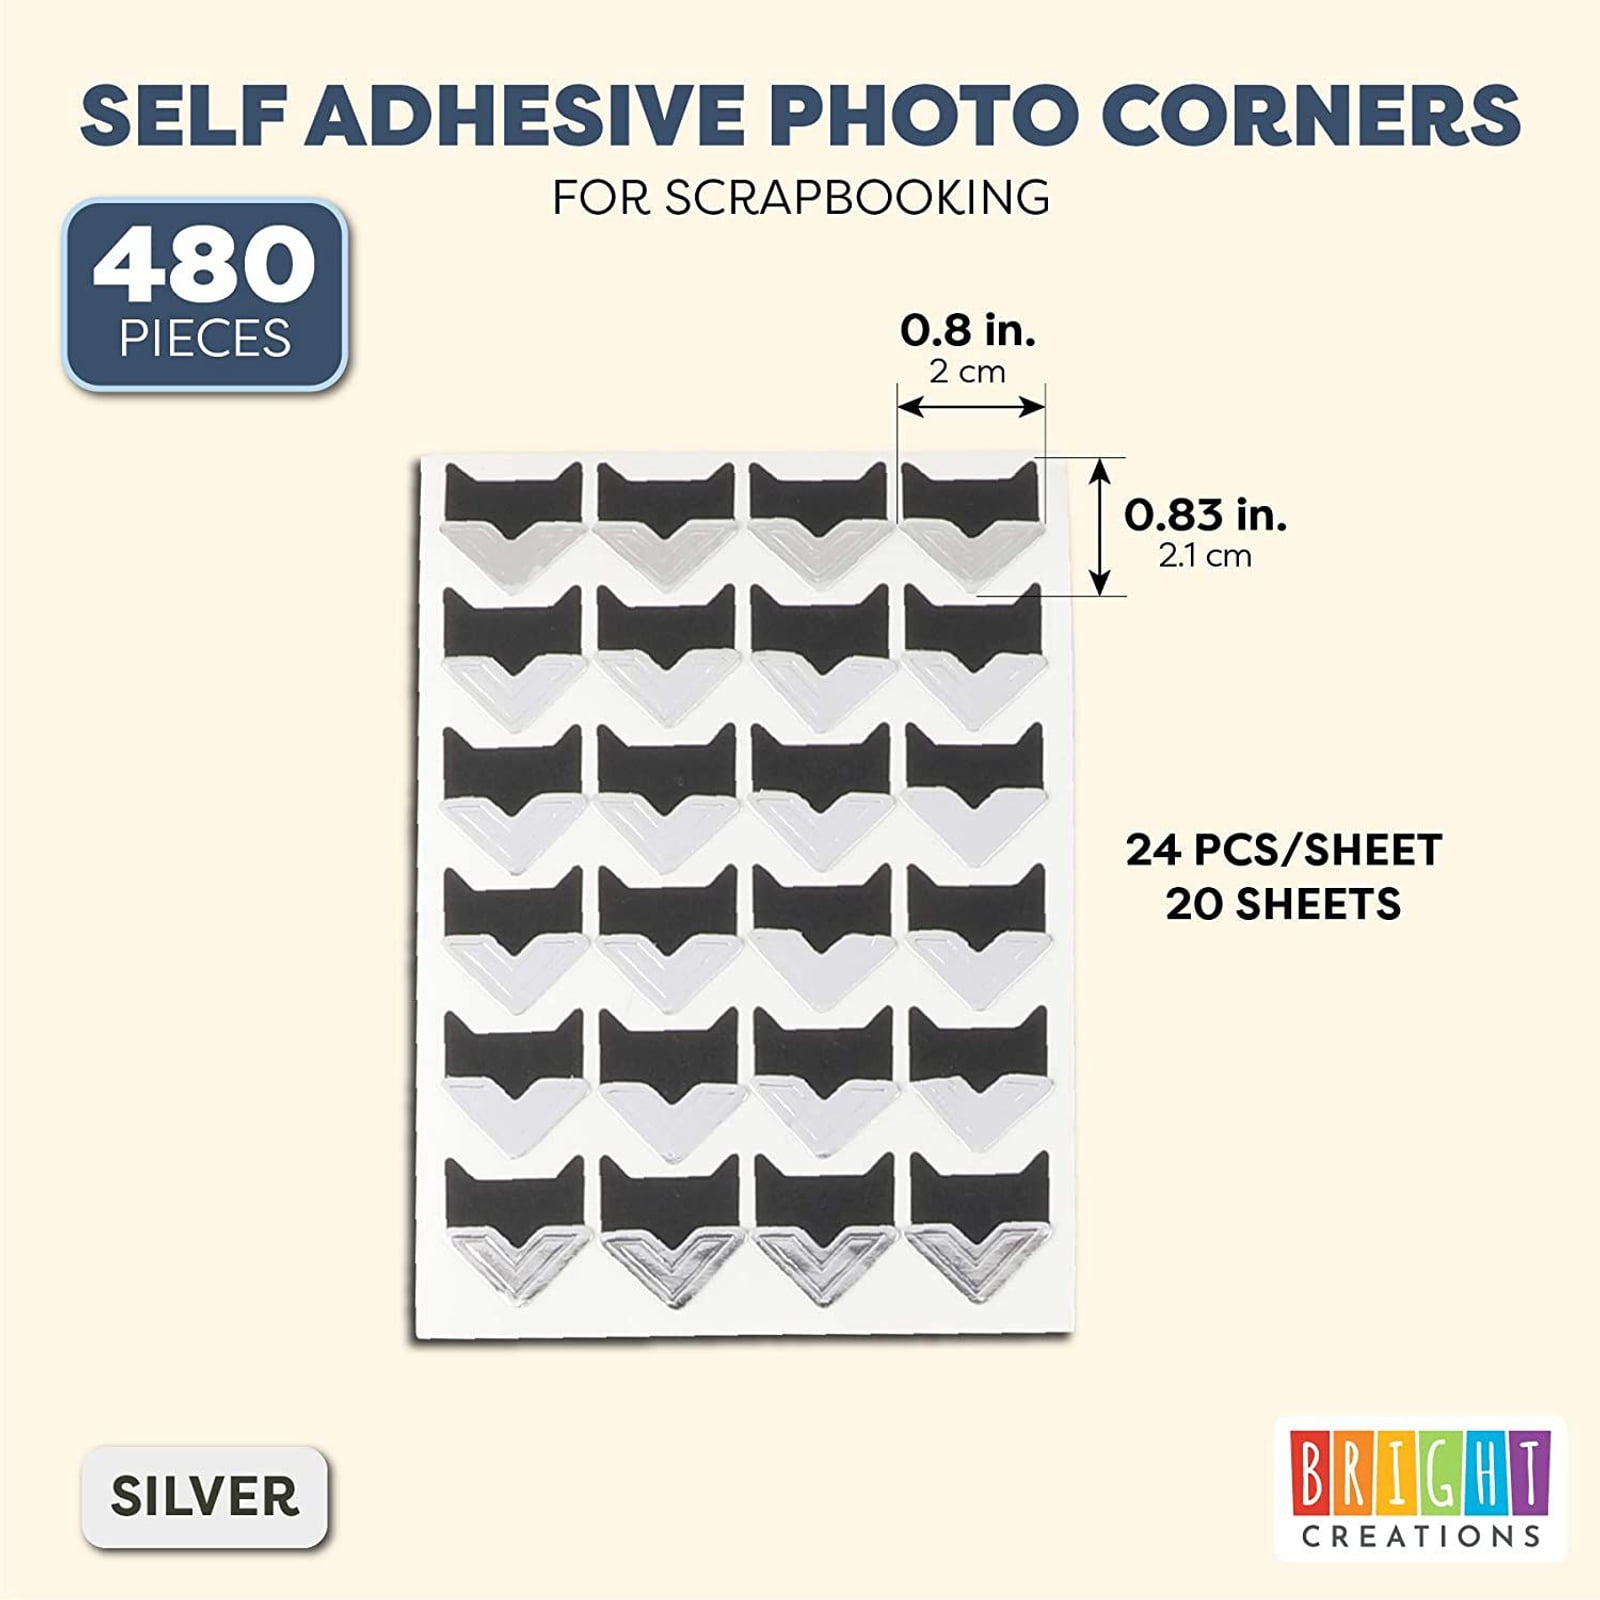 Silver, 480 Pack Self-Adhesive Photo Corners for Scrapbooking 